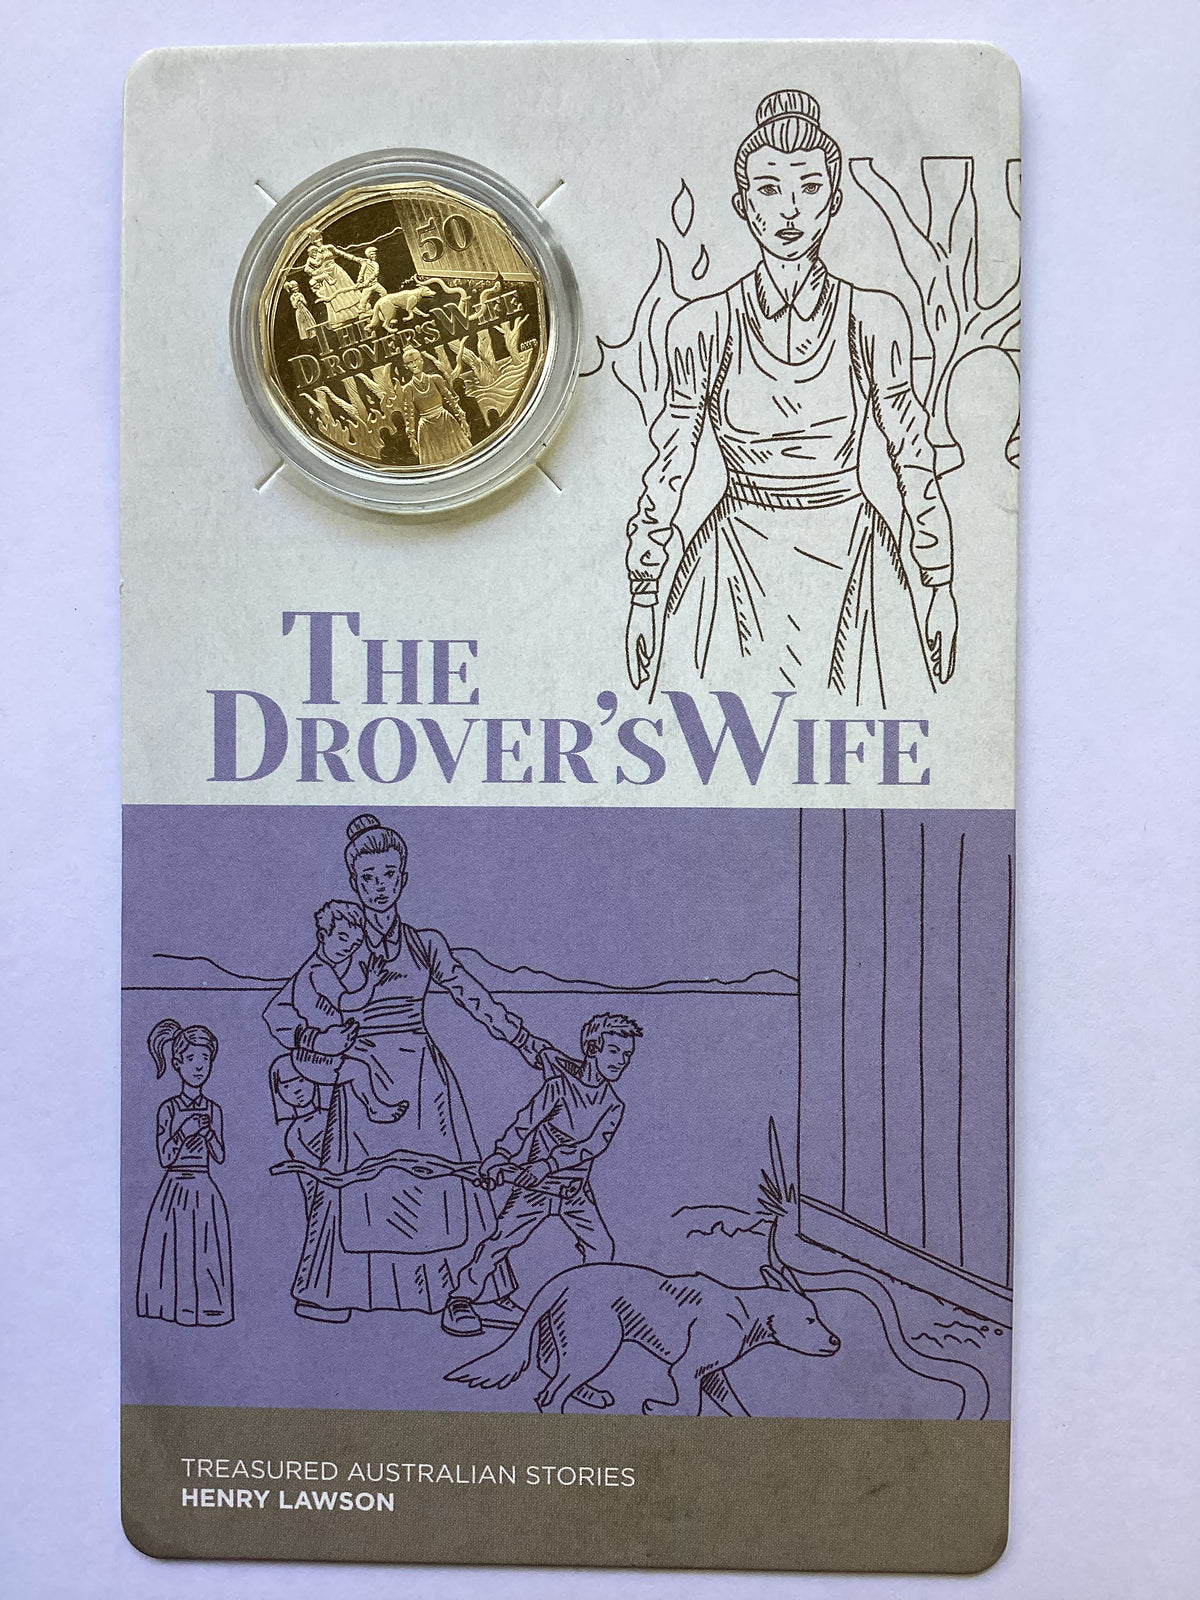 2022 50c The Drover's Wife